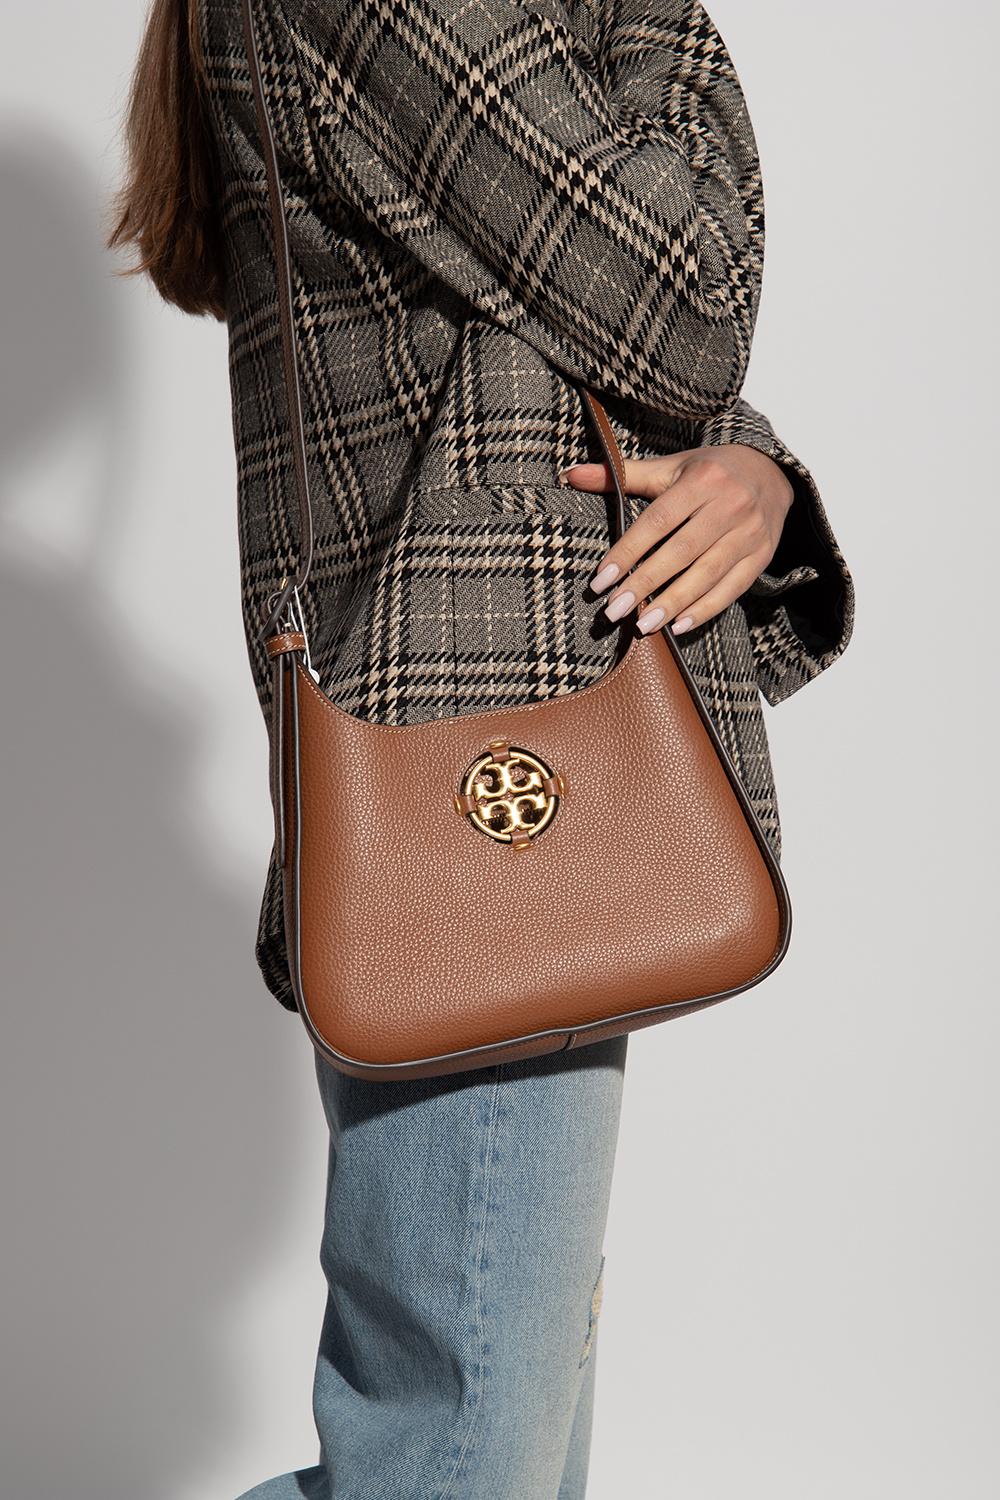 Tory Burch Miller Small Classic Shoulder Bag in Brown | Lyst